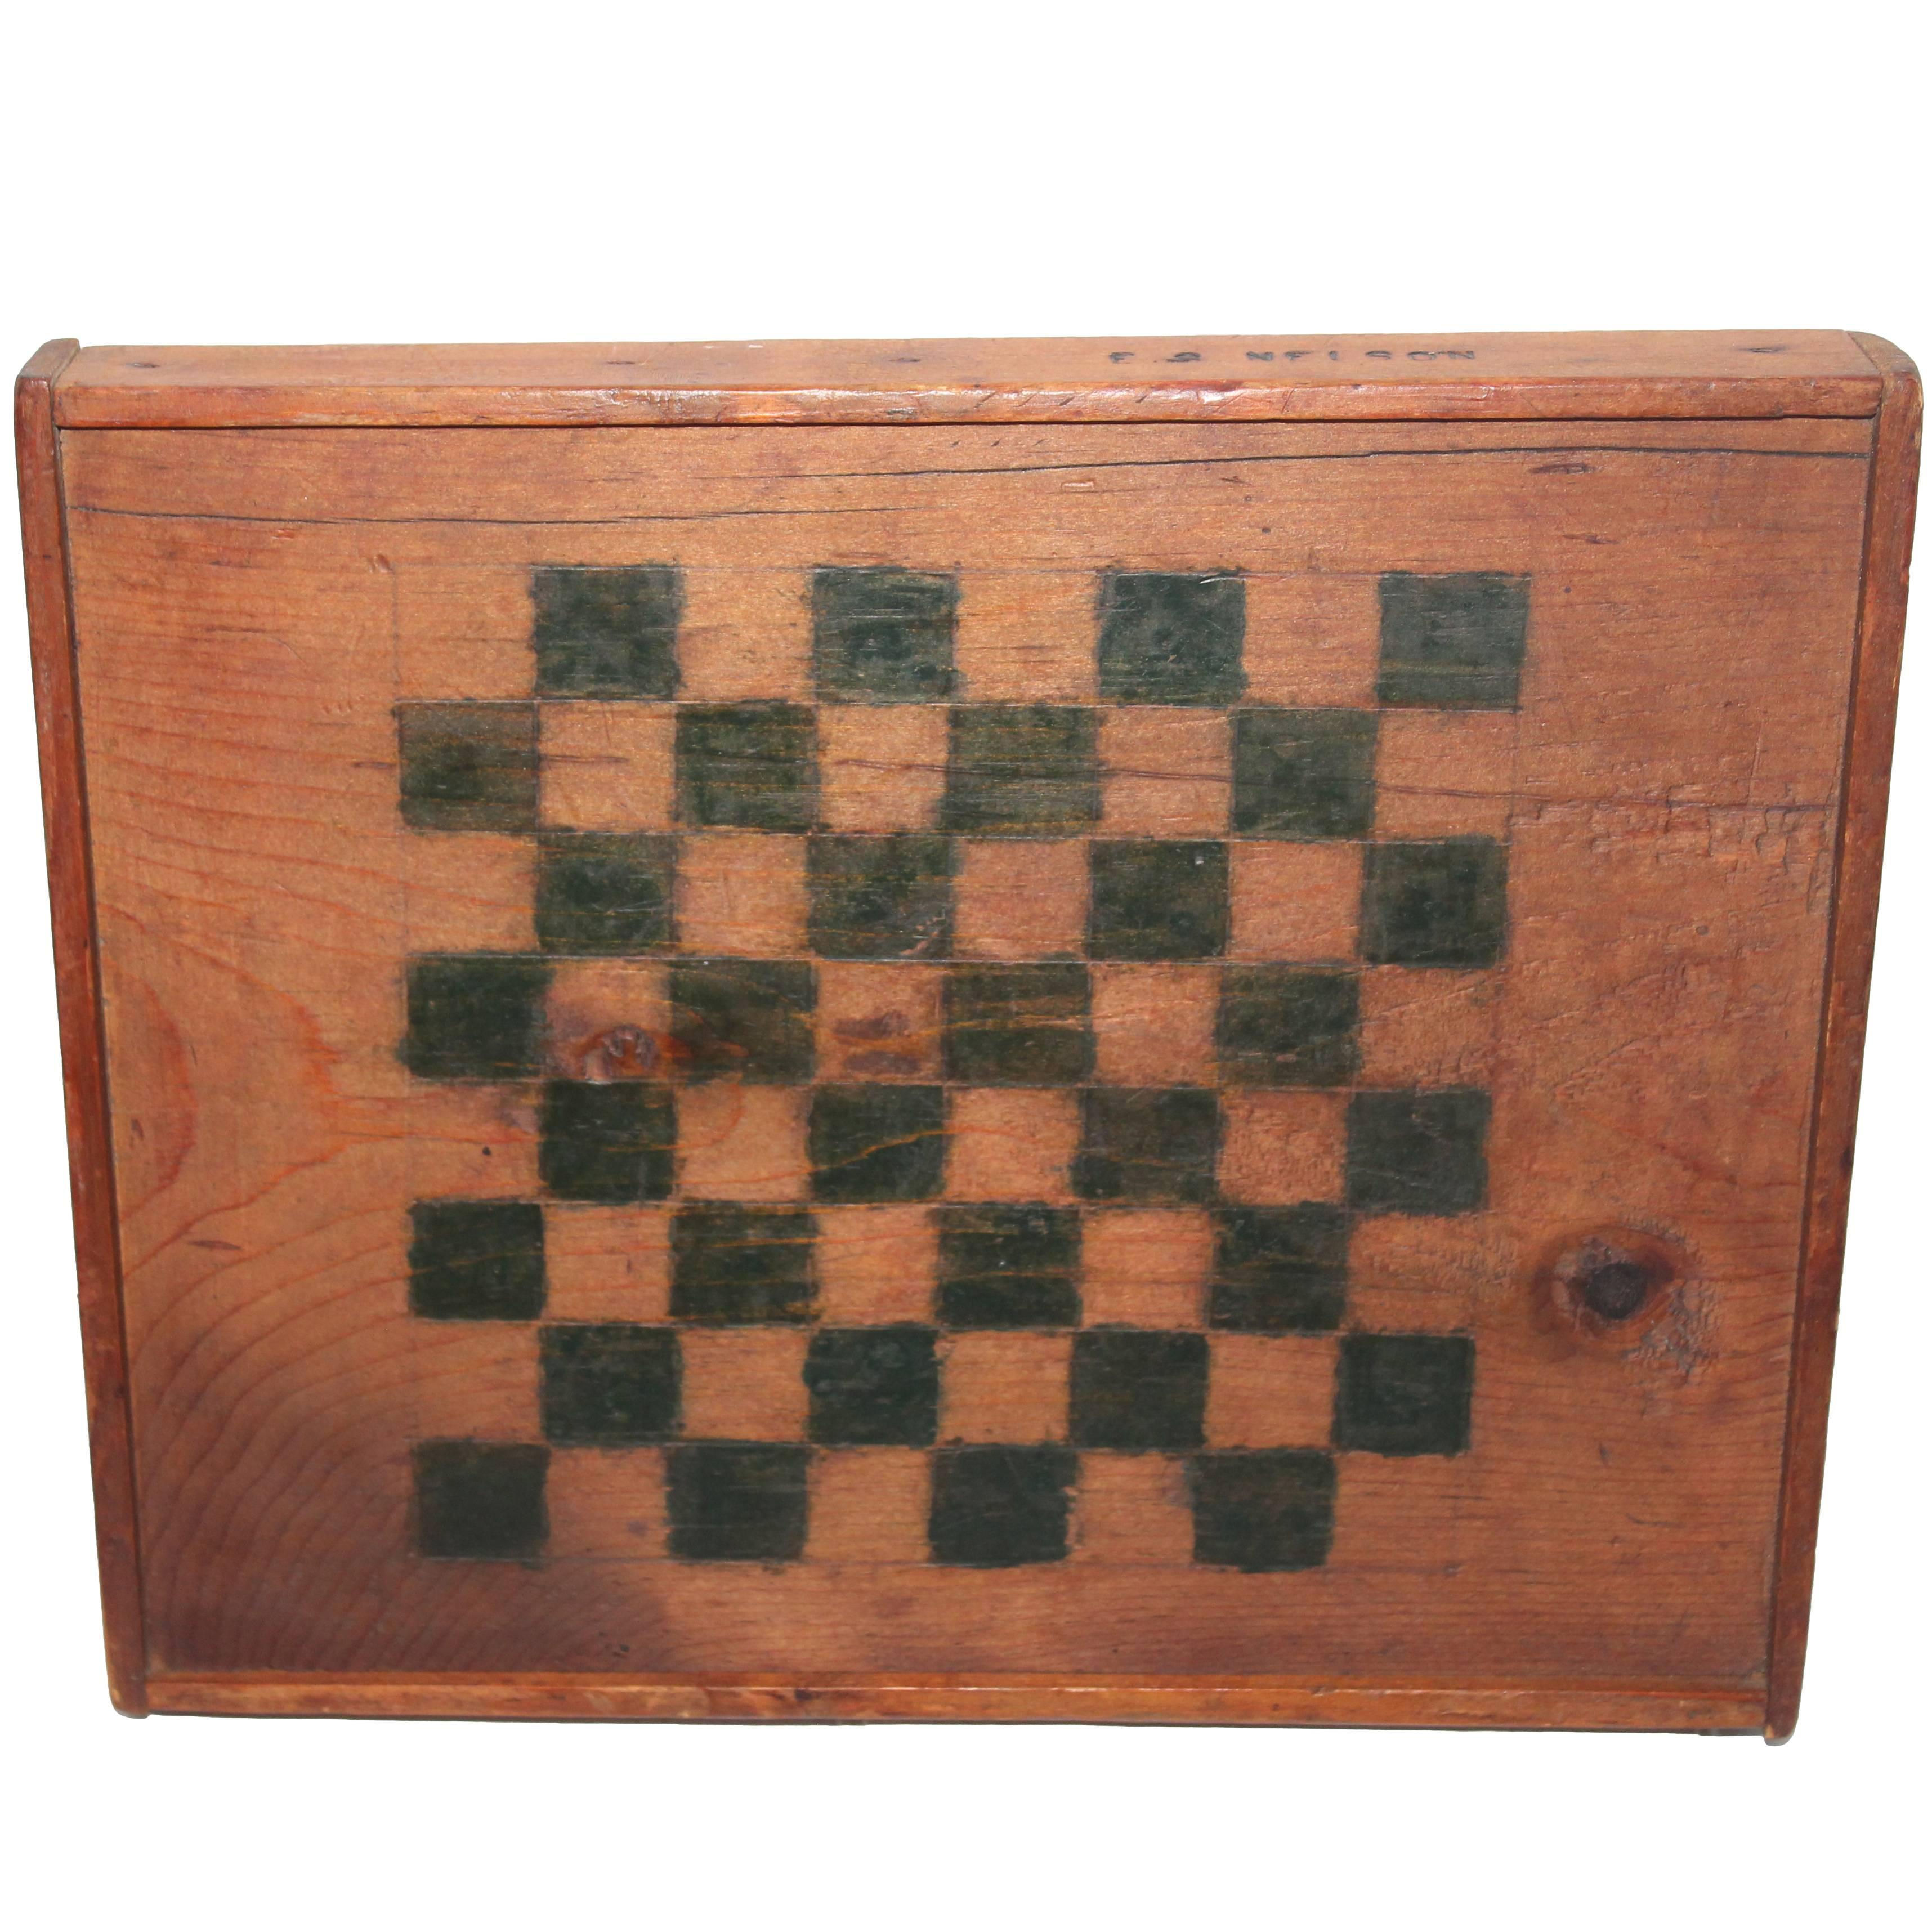 Early hand made 19th c. gameboard